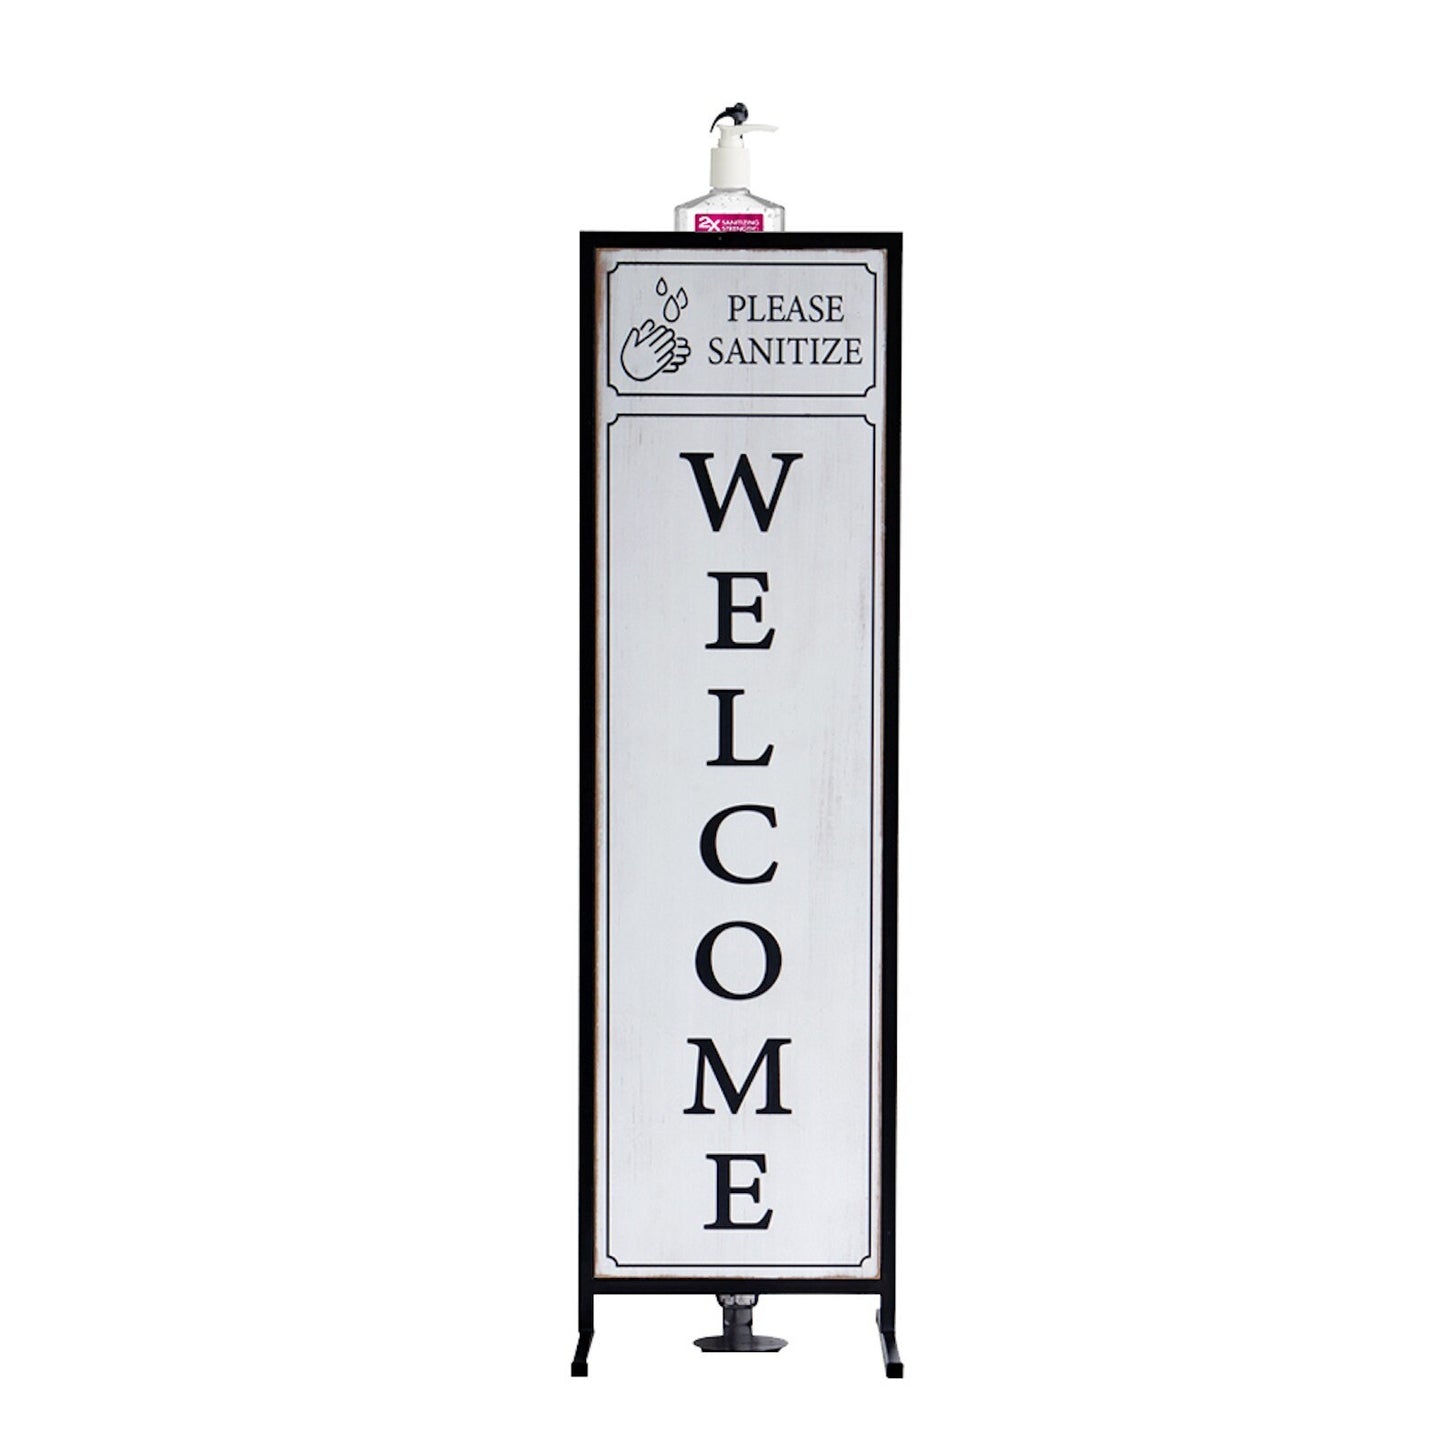 Welcome Sign with Floor Standing Foot Pedal Hand Sanitizer Dispenser Stand 48-Inch (White)